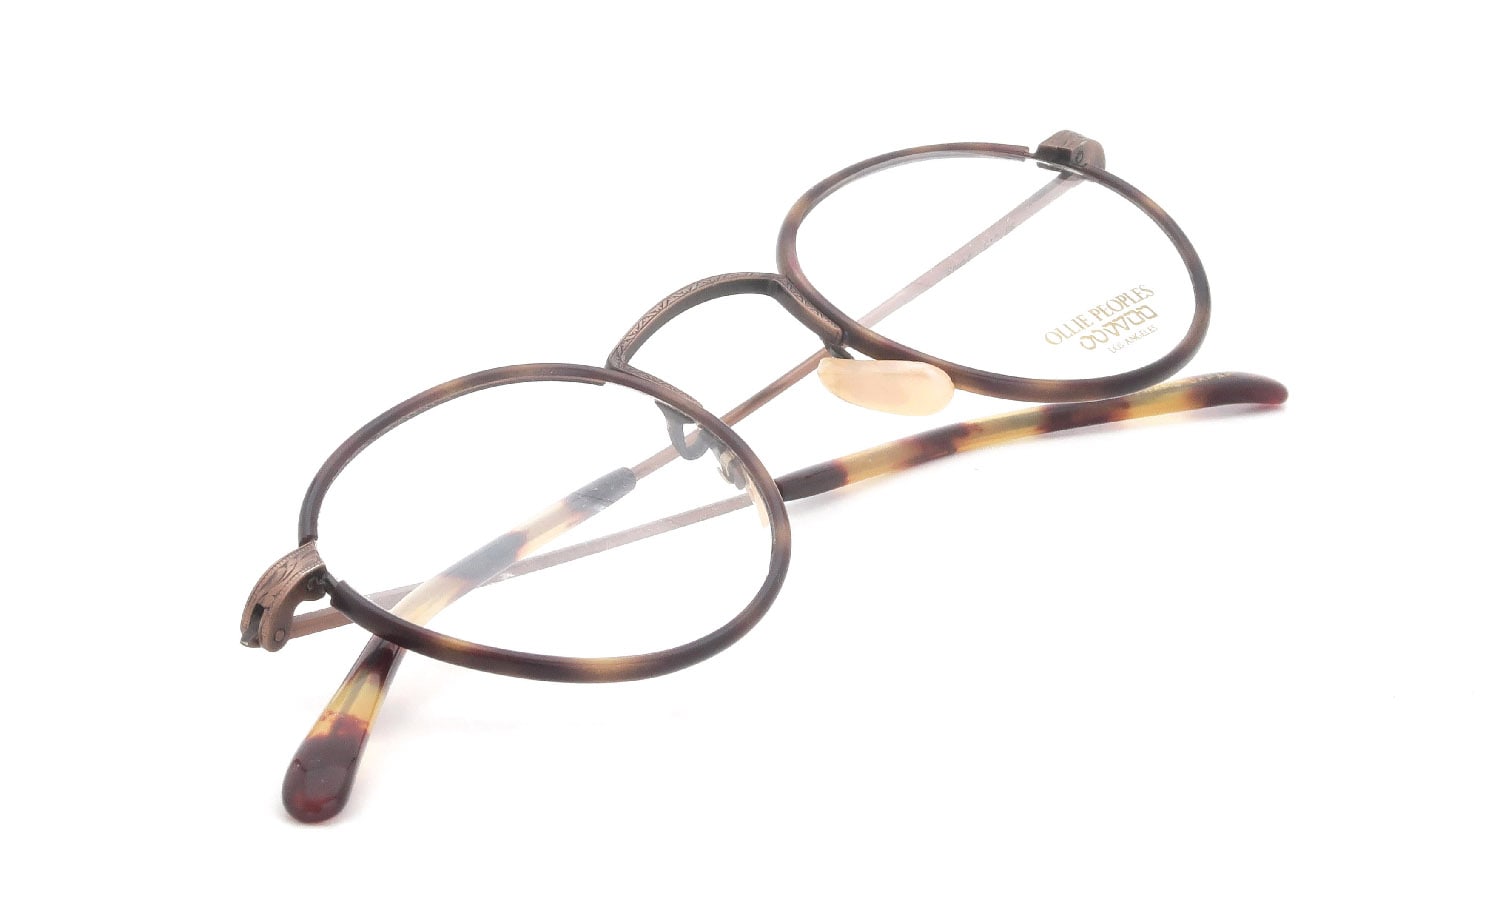 OLIVER PEOPLES Archive 1990's Souse 517-BR